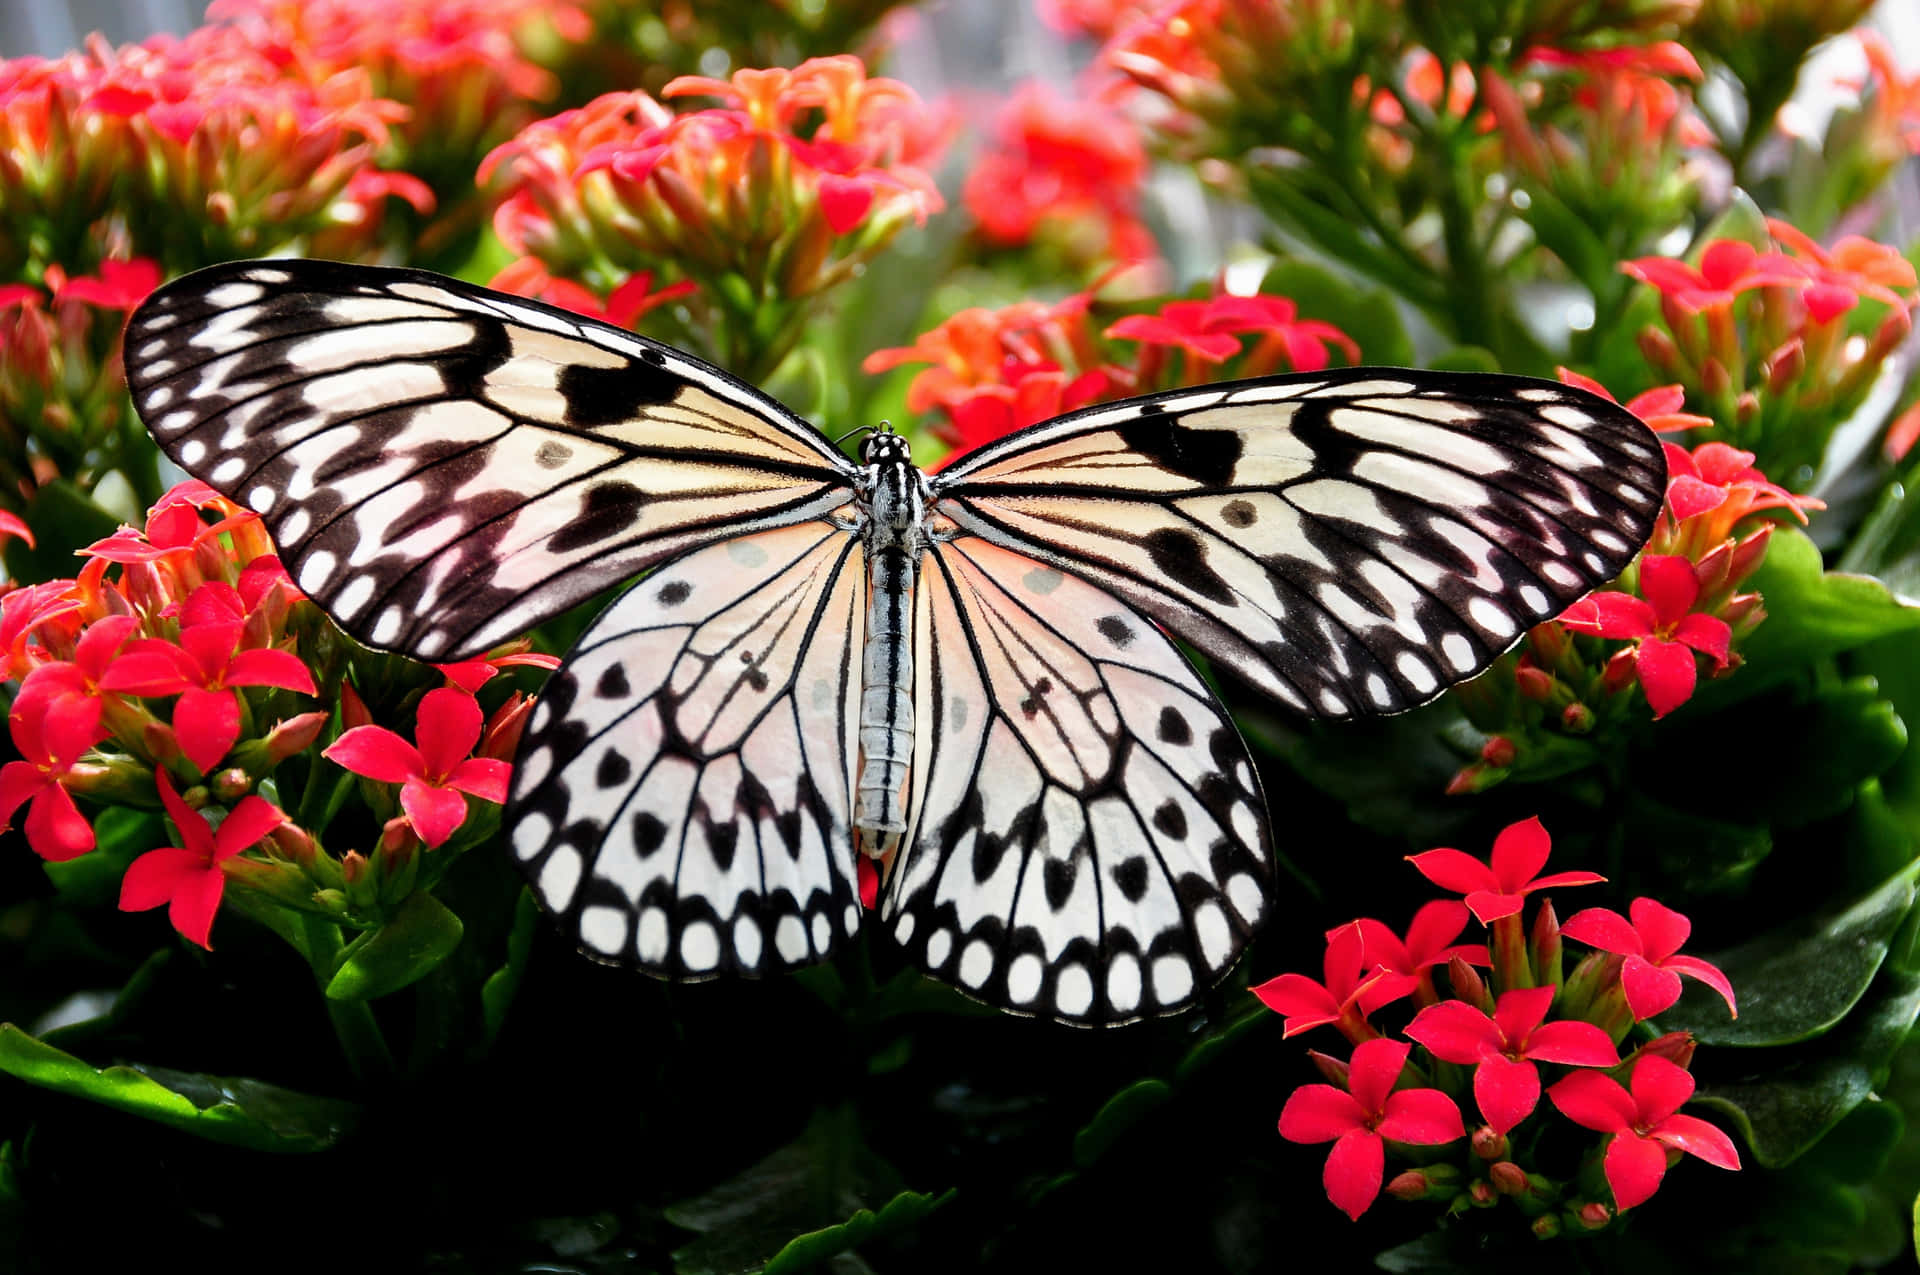 A beautiful butterfly displays its bold colors on a flower